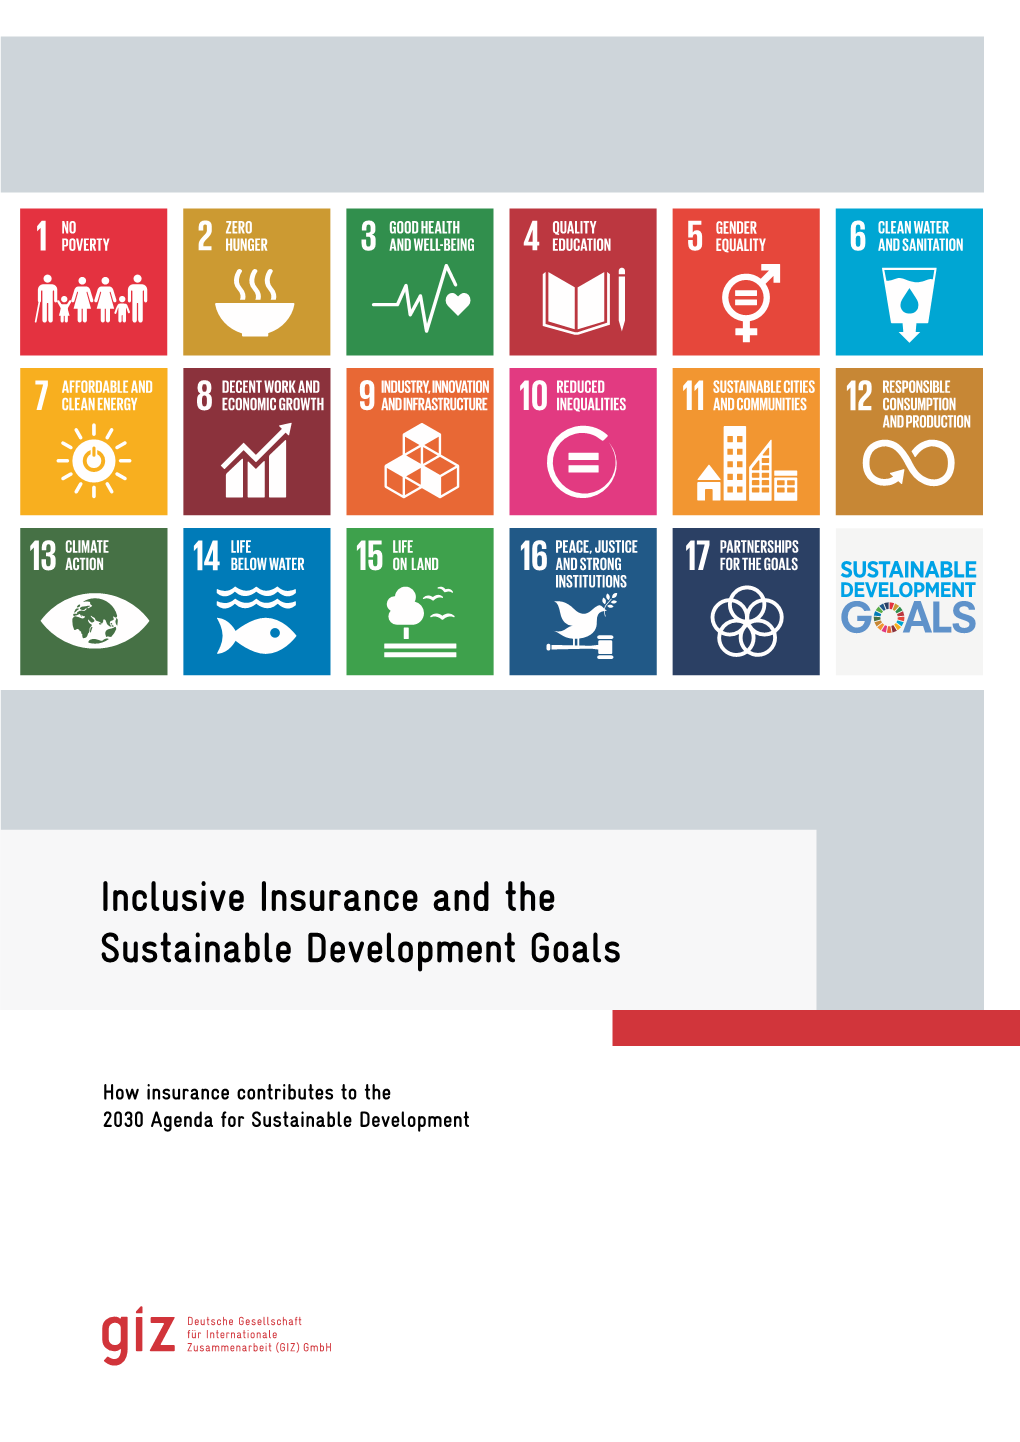 Inclusive Insurance and the Sustainable Development Goals